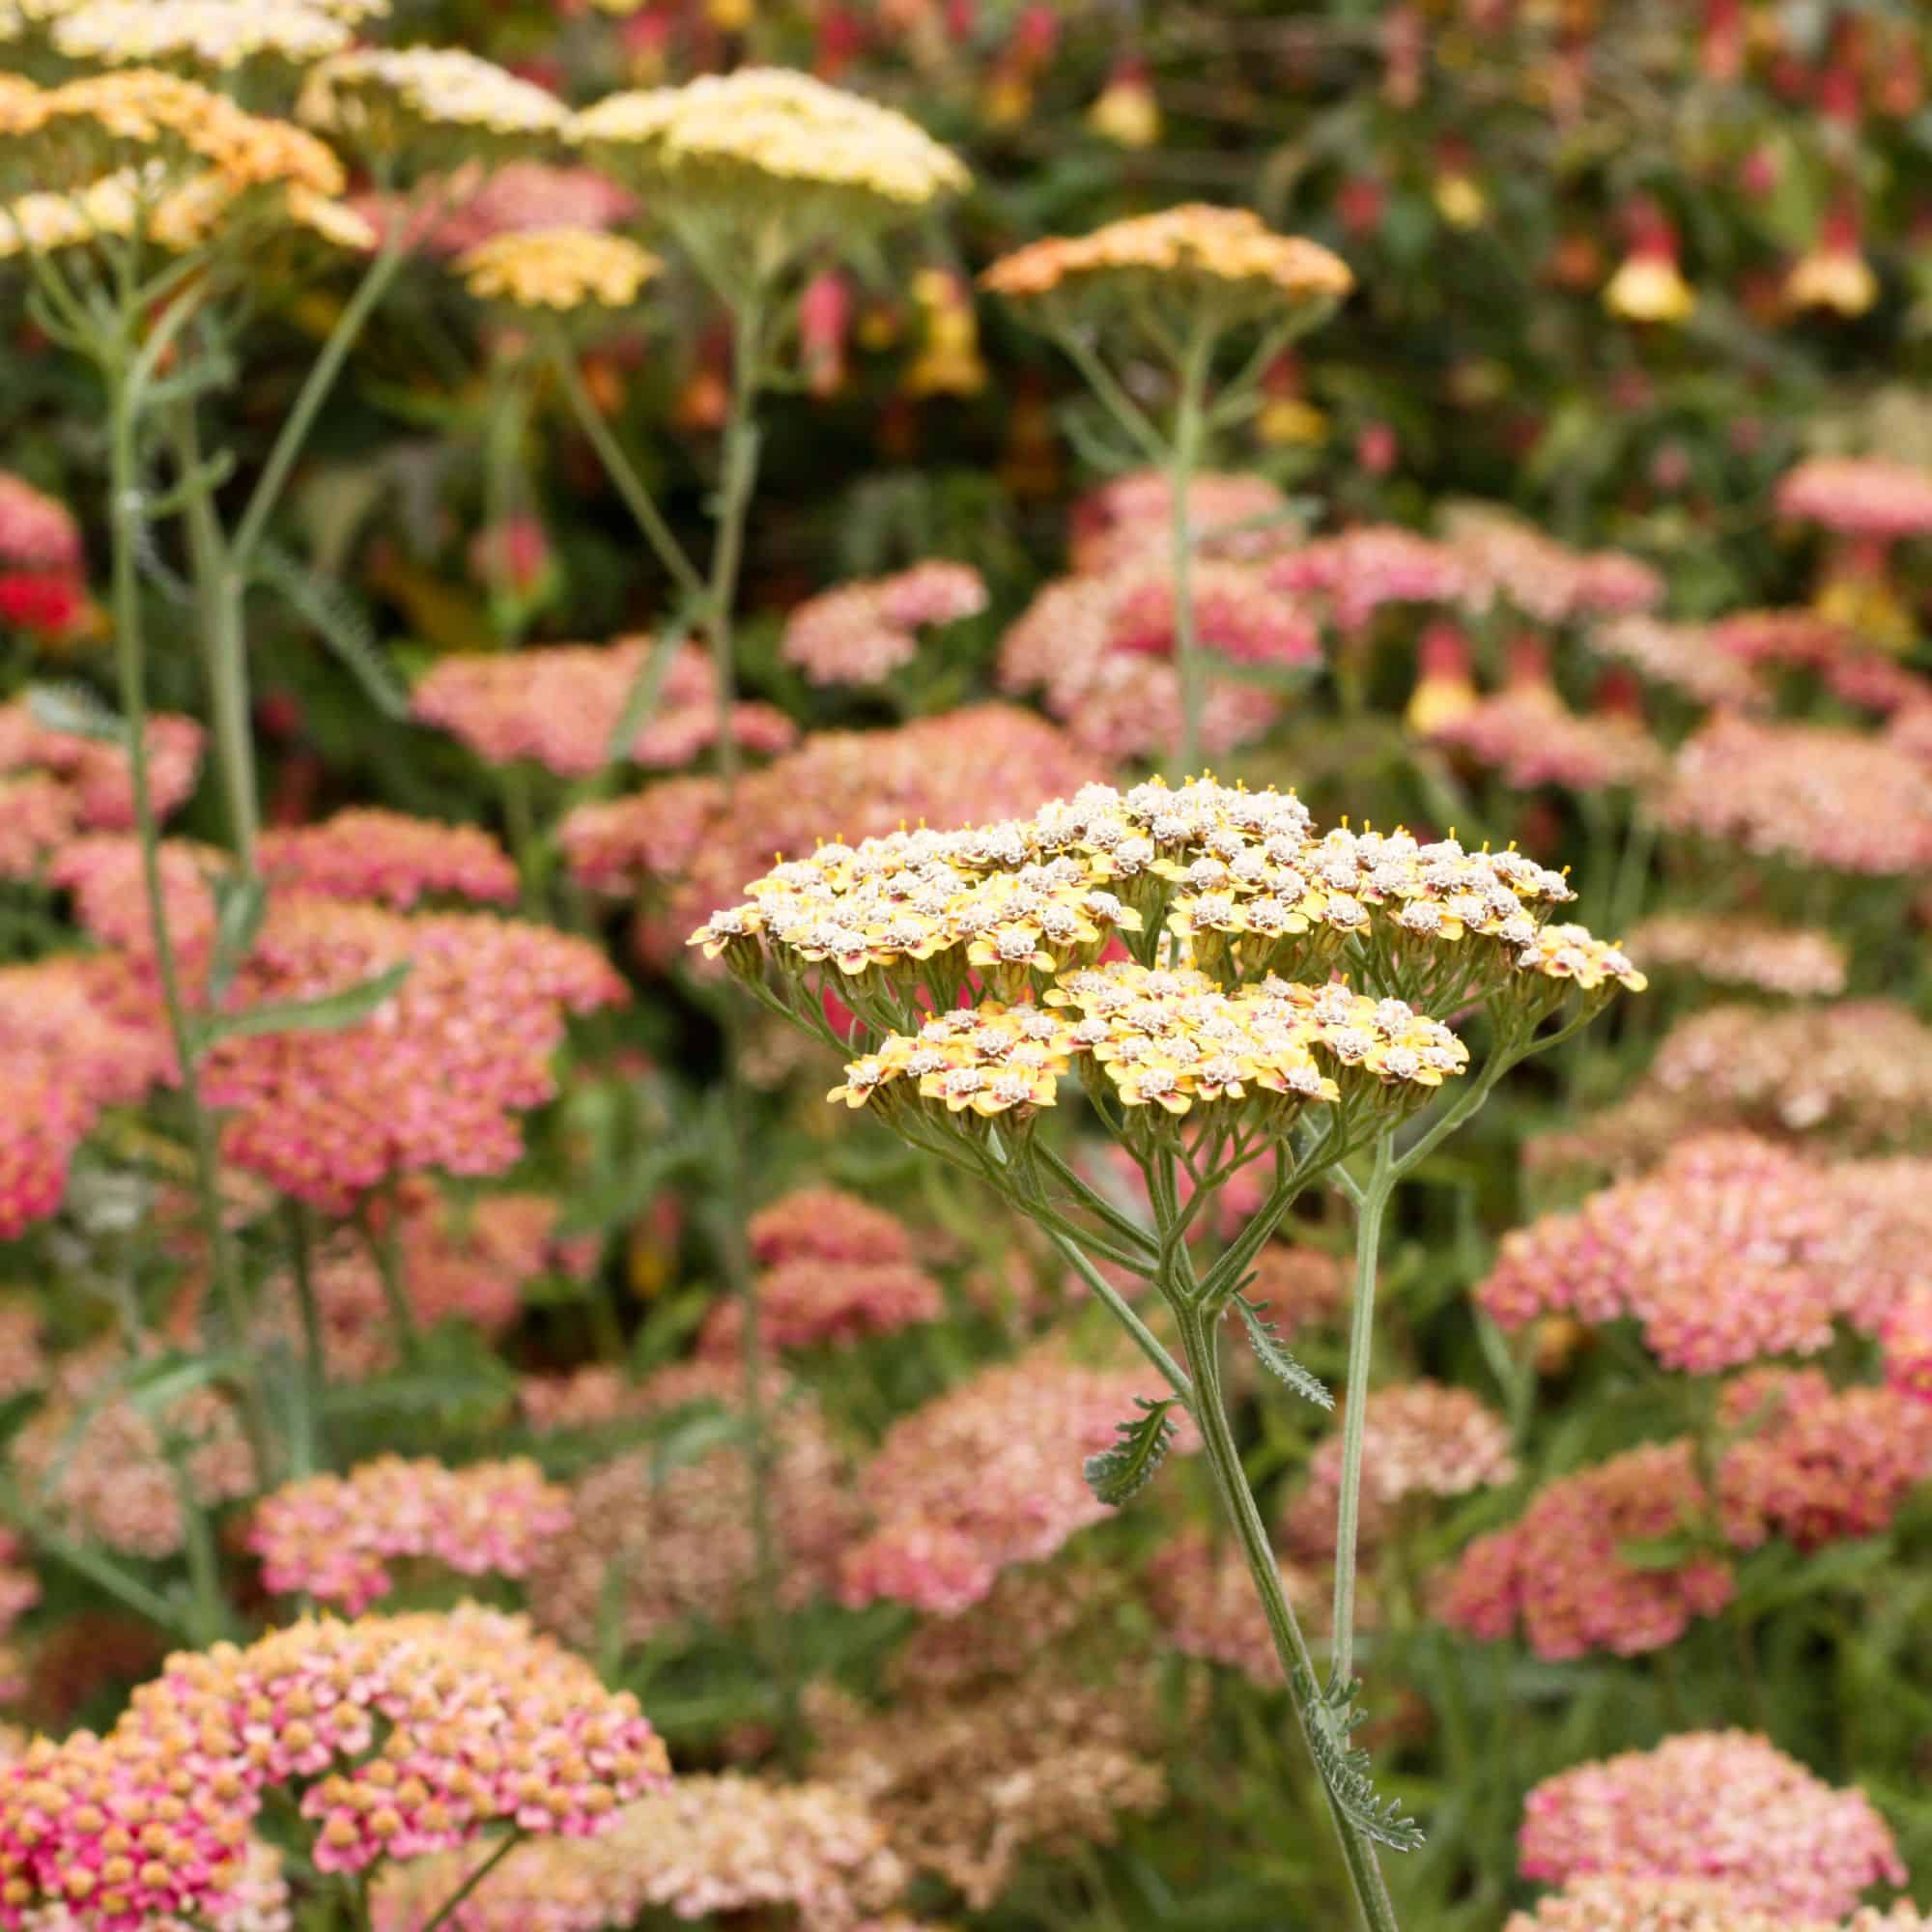 Pink and white yarrow flowers growing together.